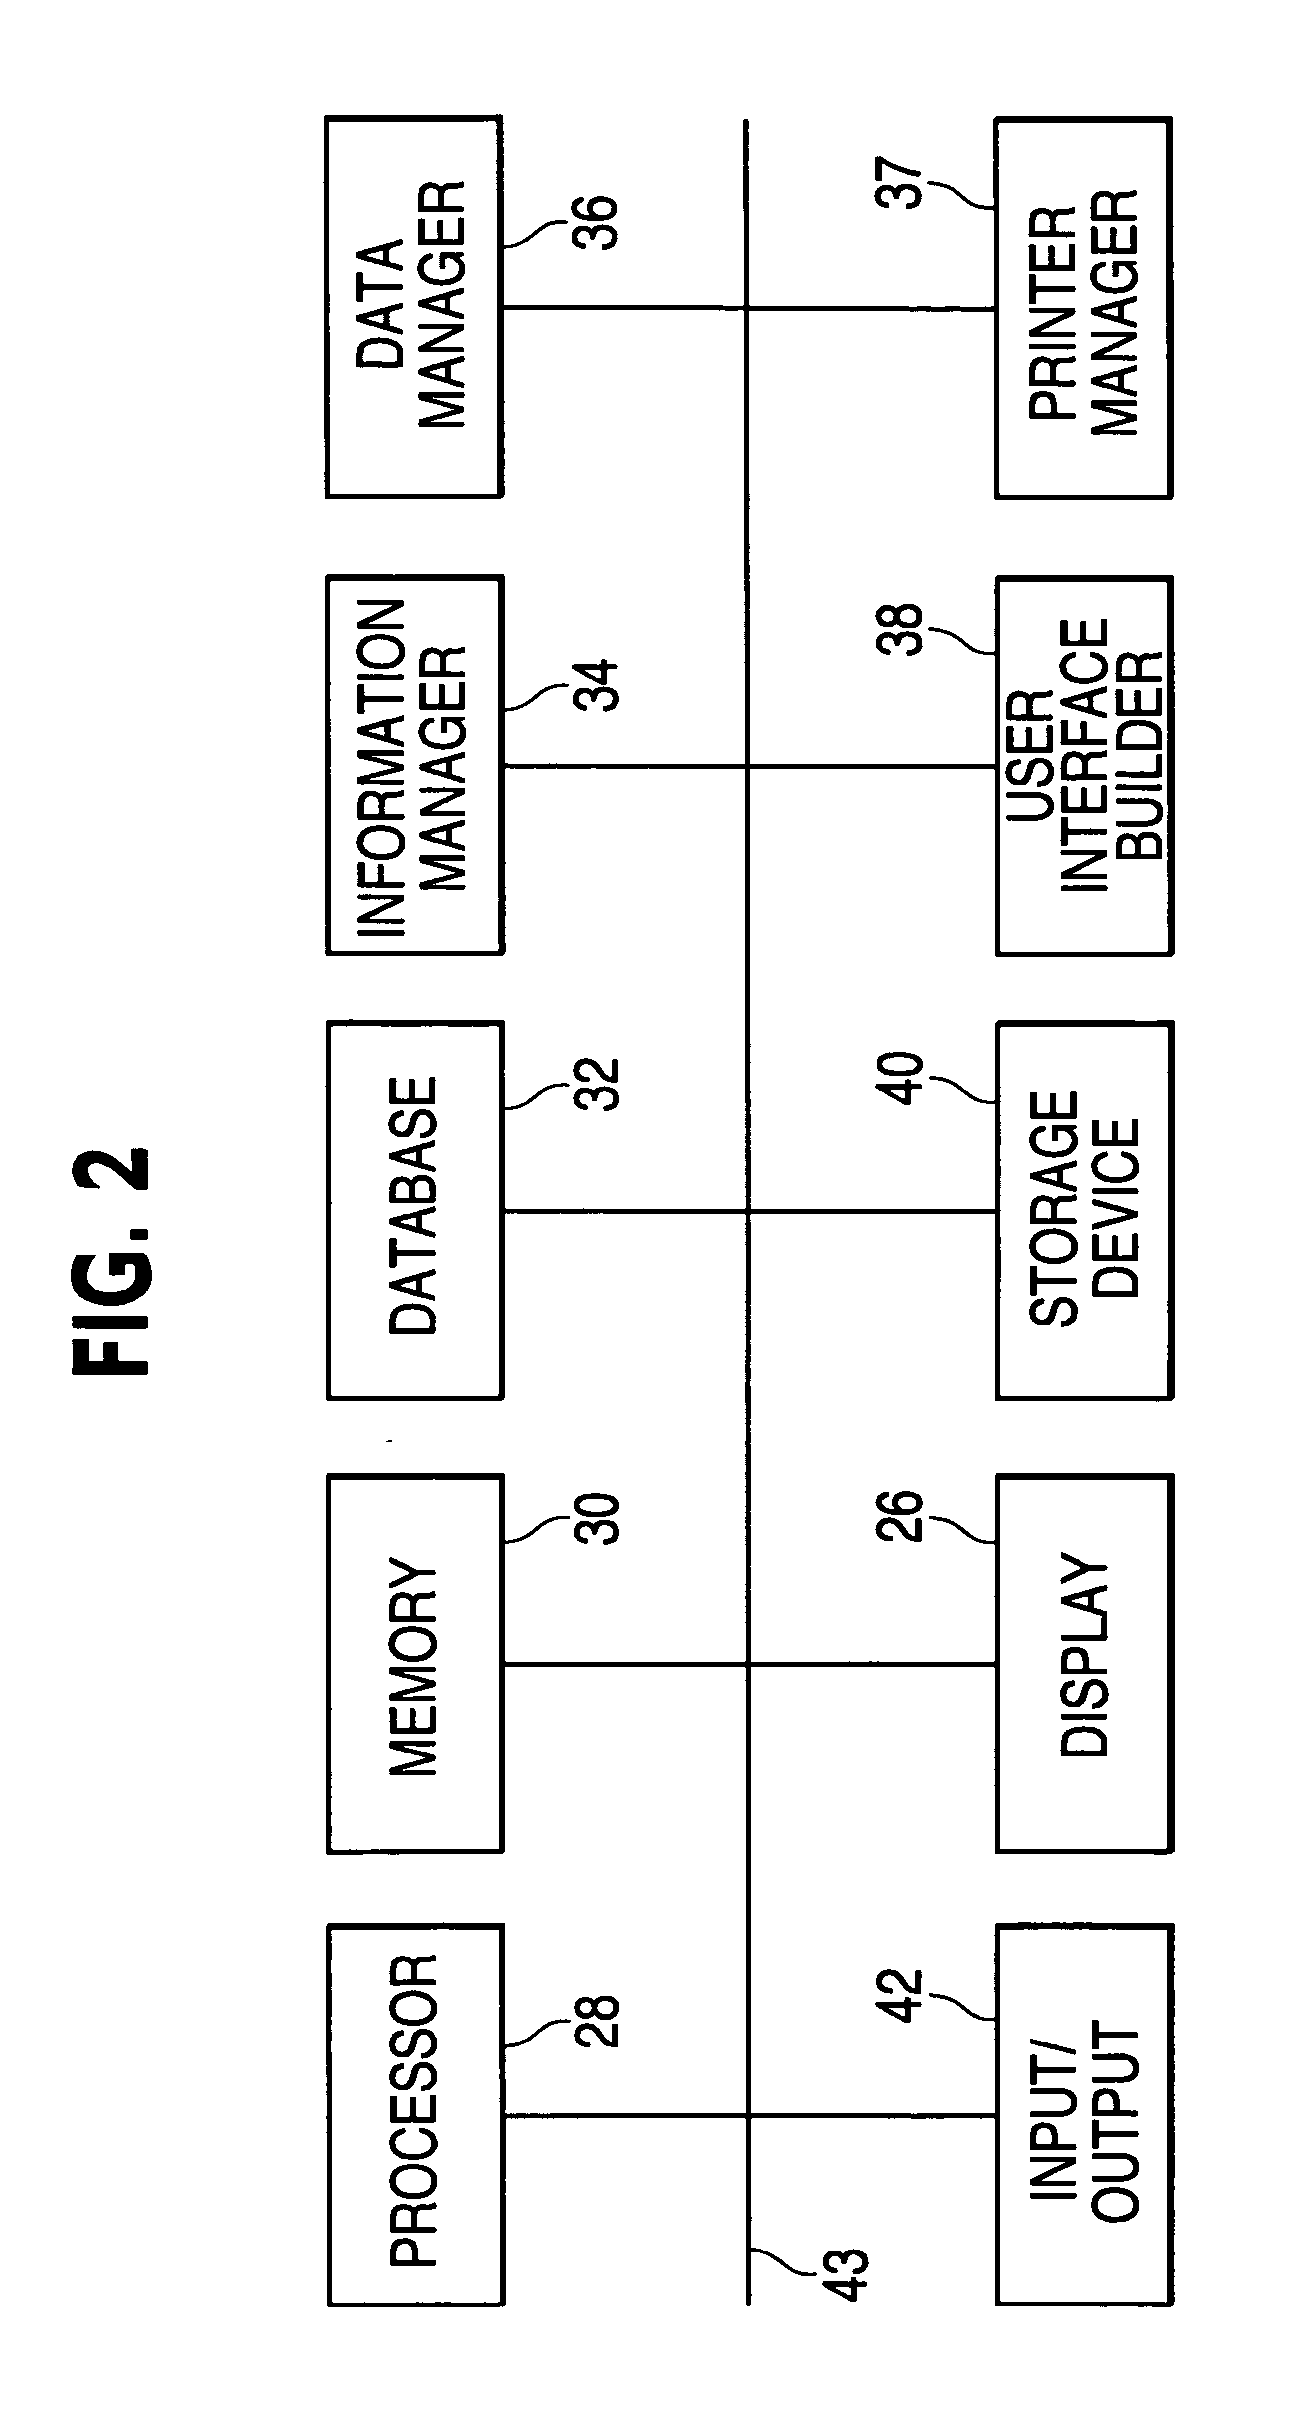 Technical information management apparatus and method for vehicle diagnostic tools